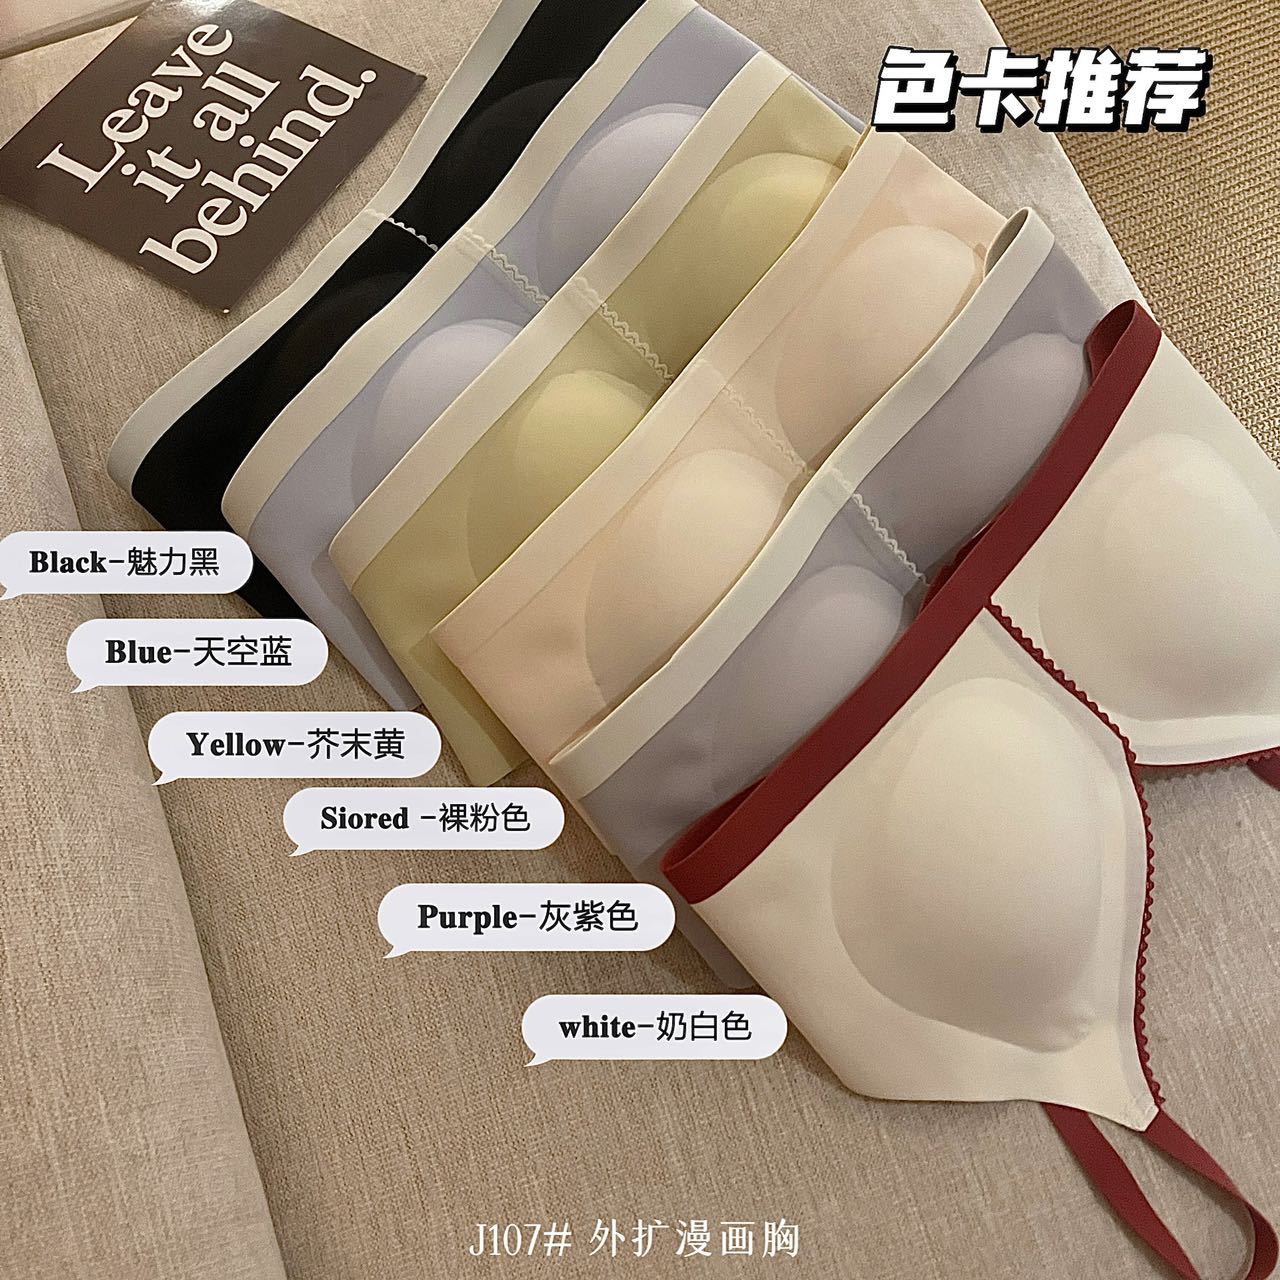 New Expansion Underwear Women's Cartoon Figure Push up and Show Big Seamless No Wire Accessory Breast Push up Contrast Color V-neck Bra